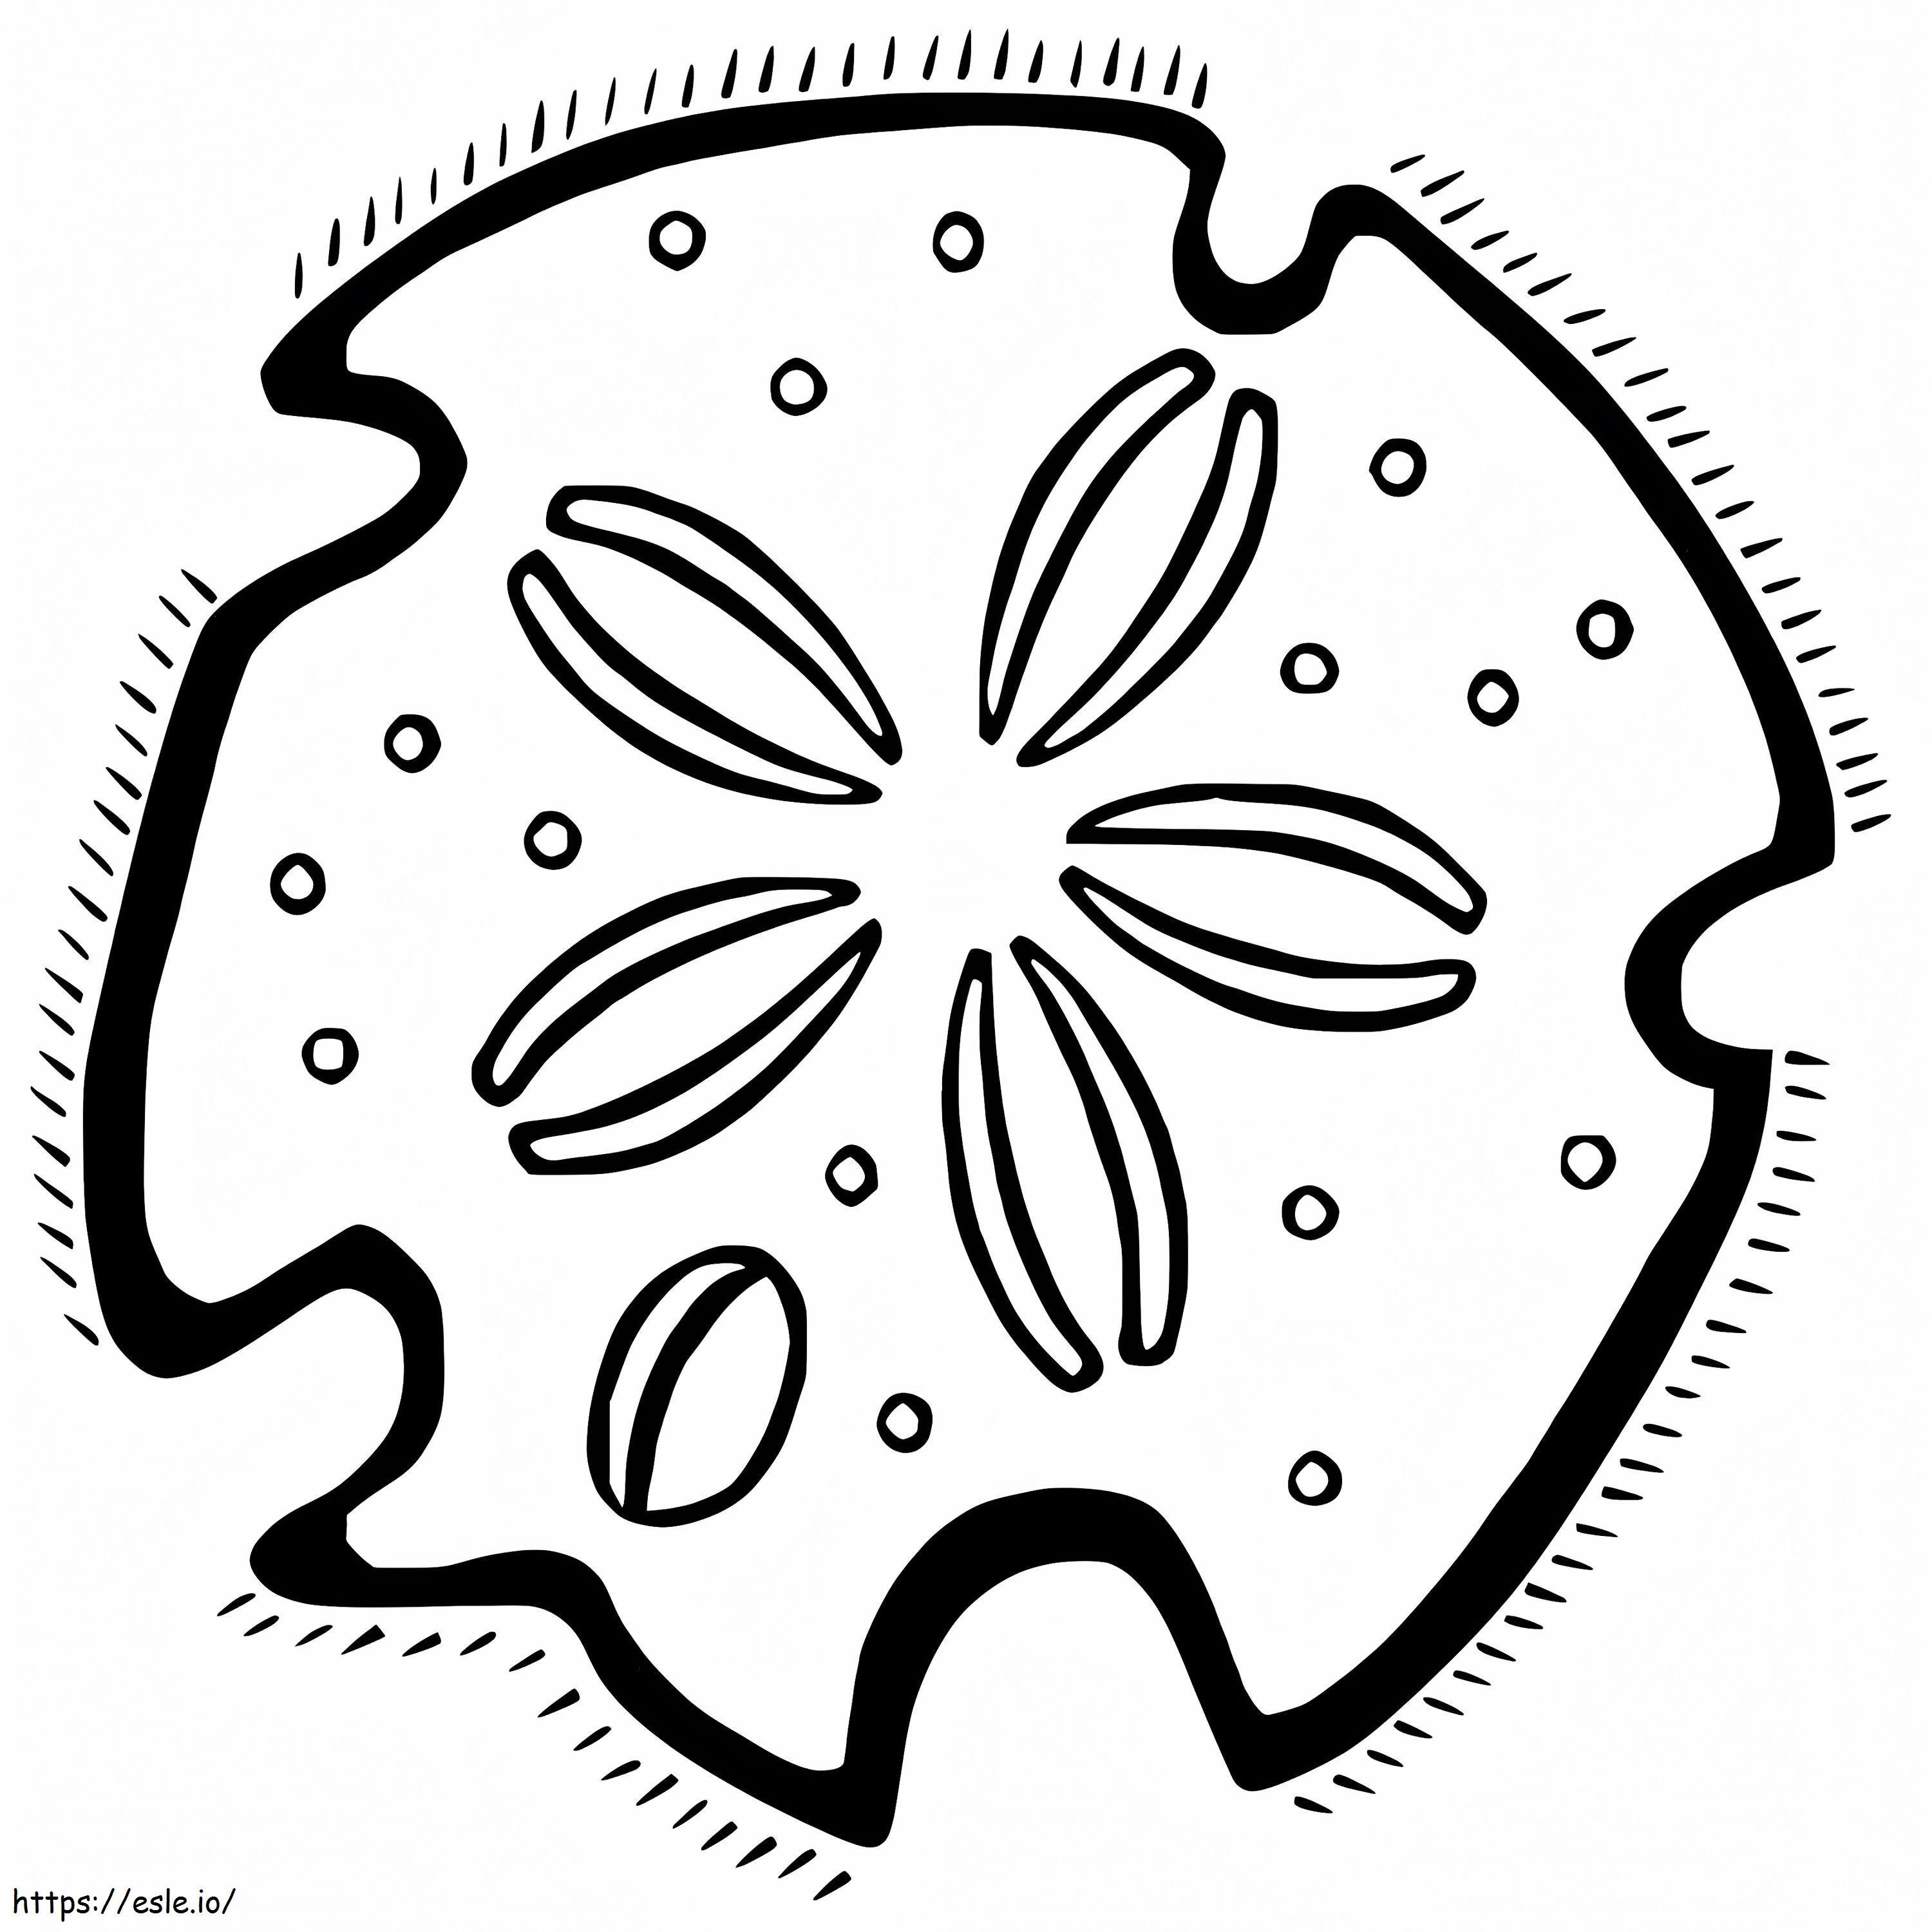 Sand Dollar 9 coloring page